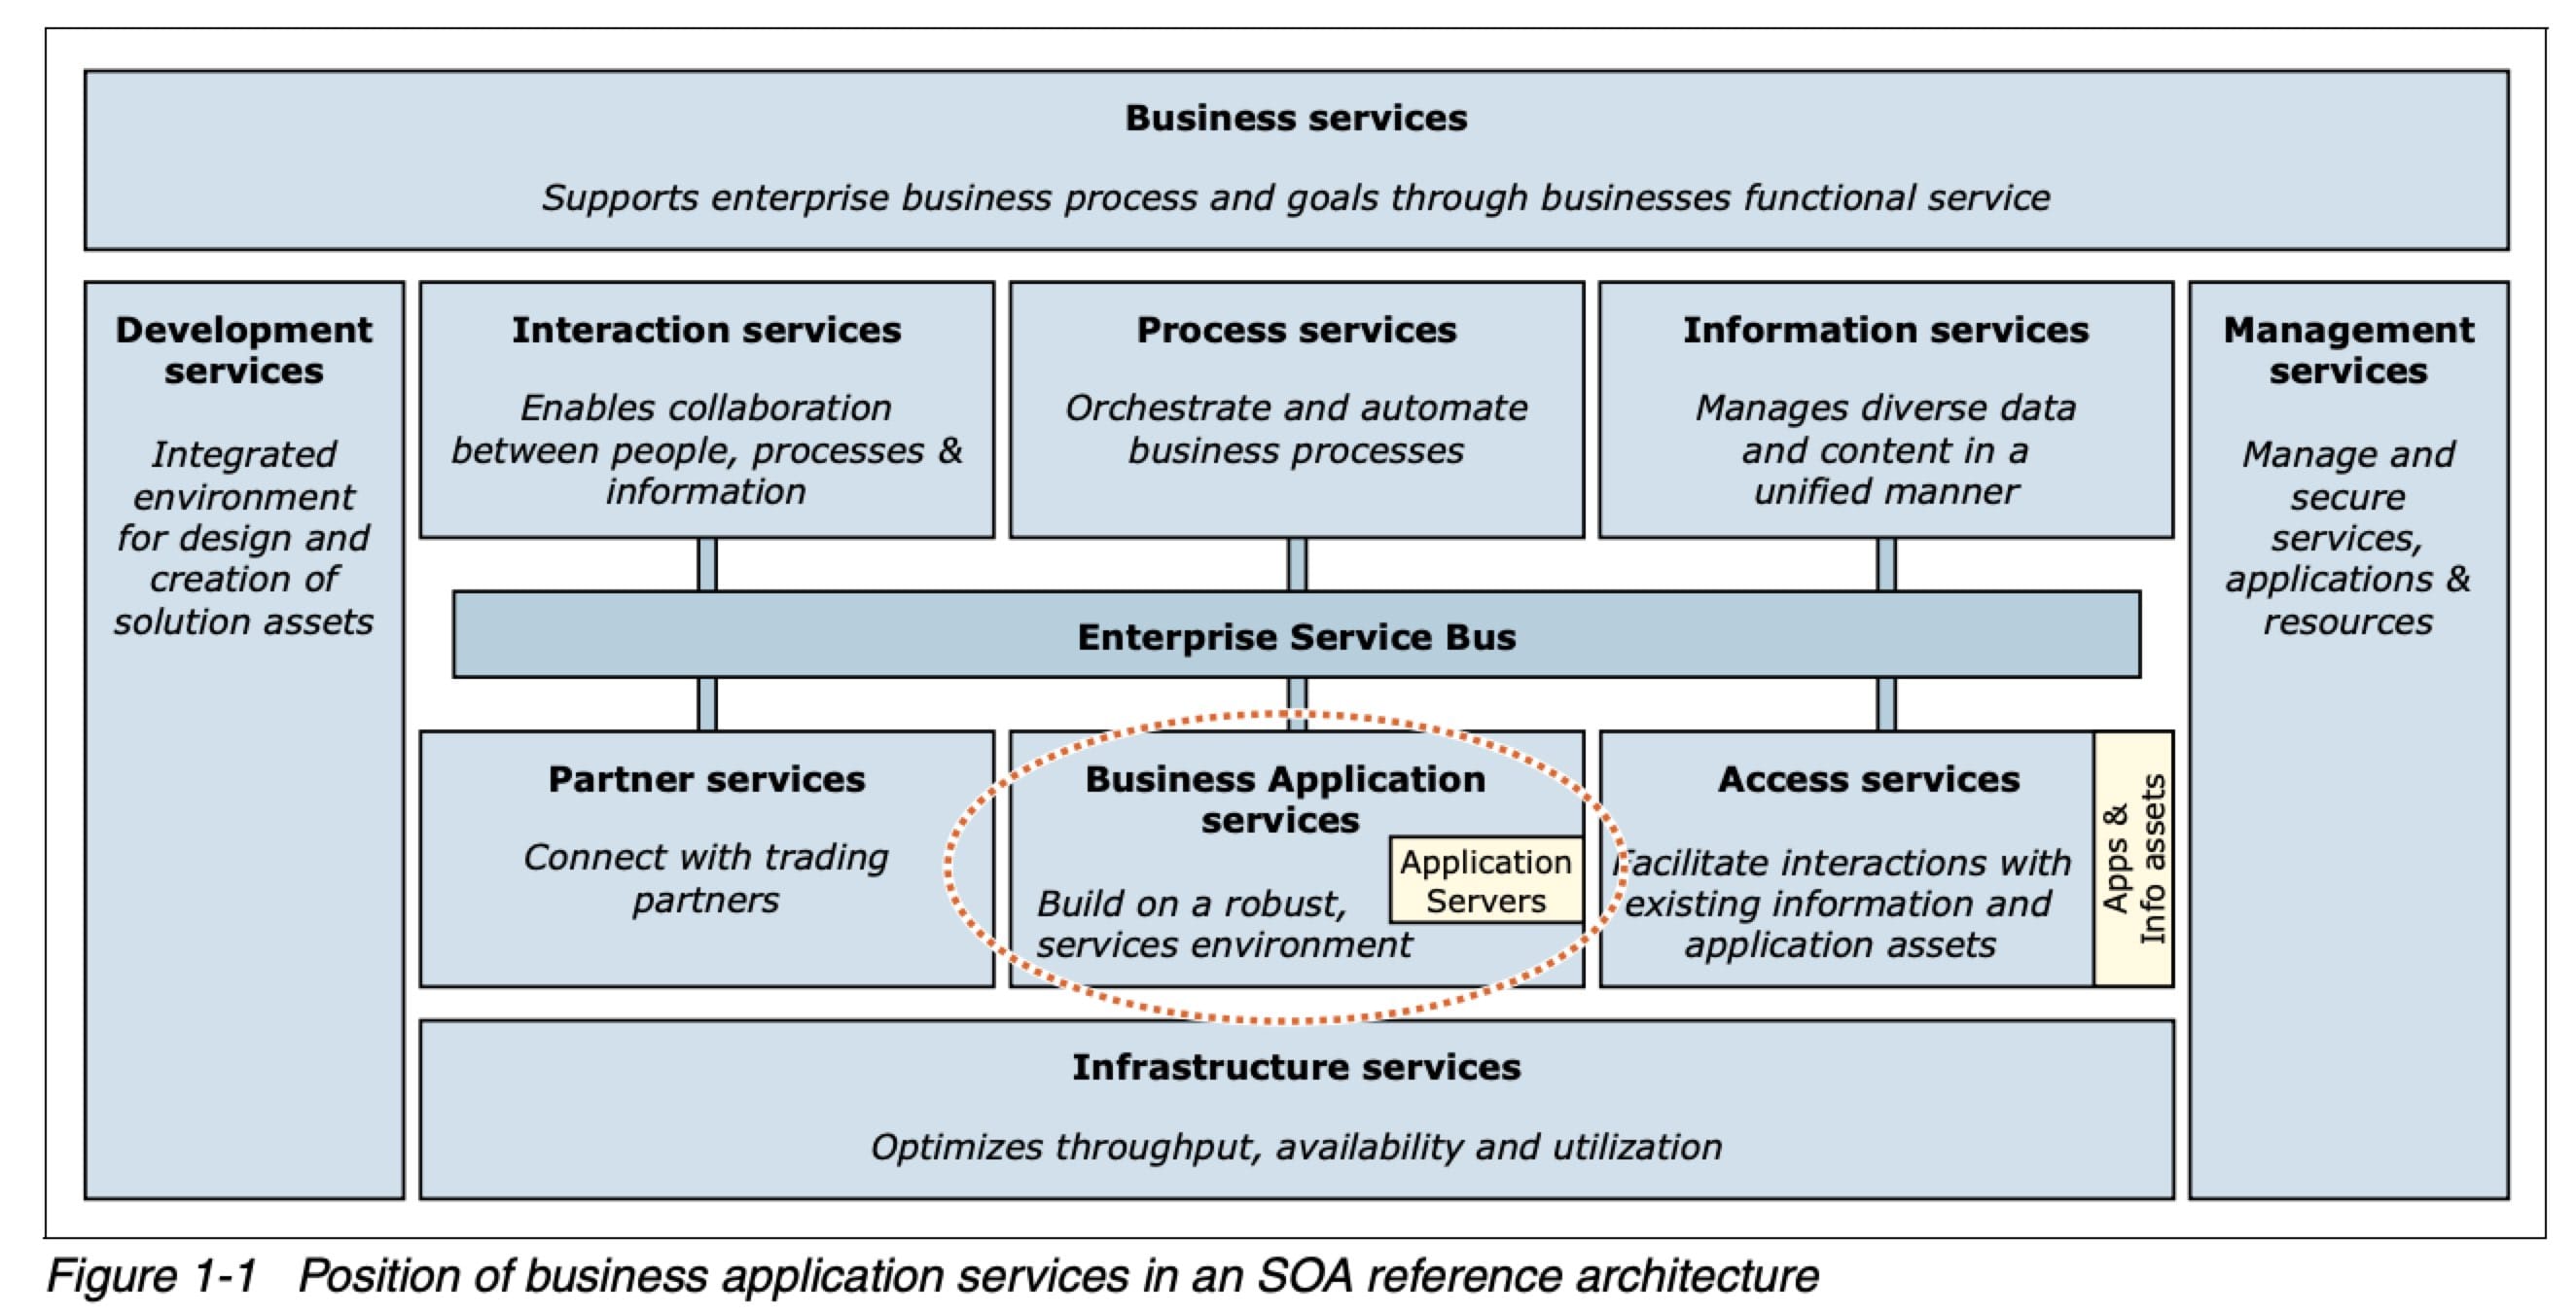 Position of business application services in an SOA reference architecture